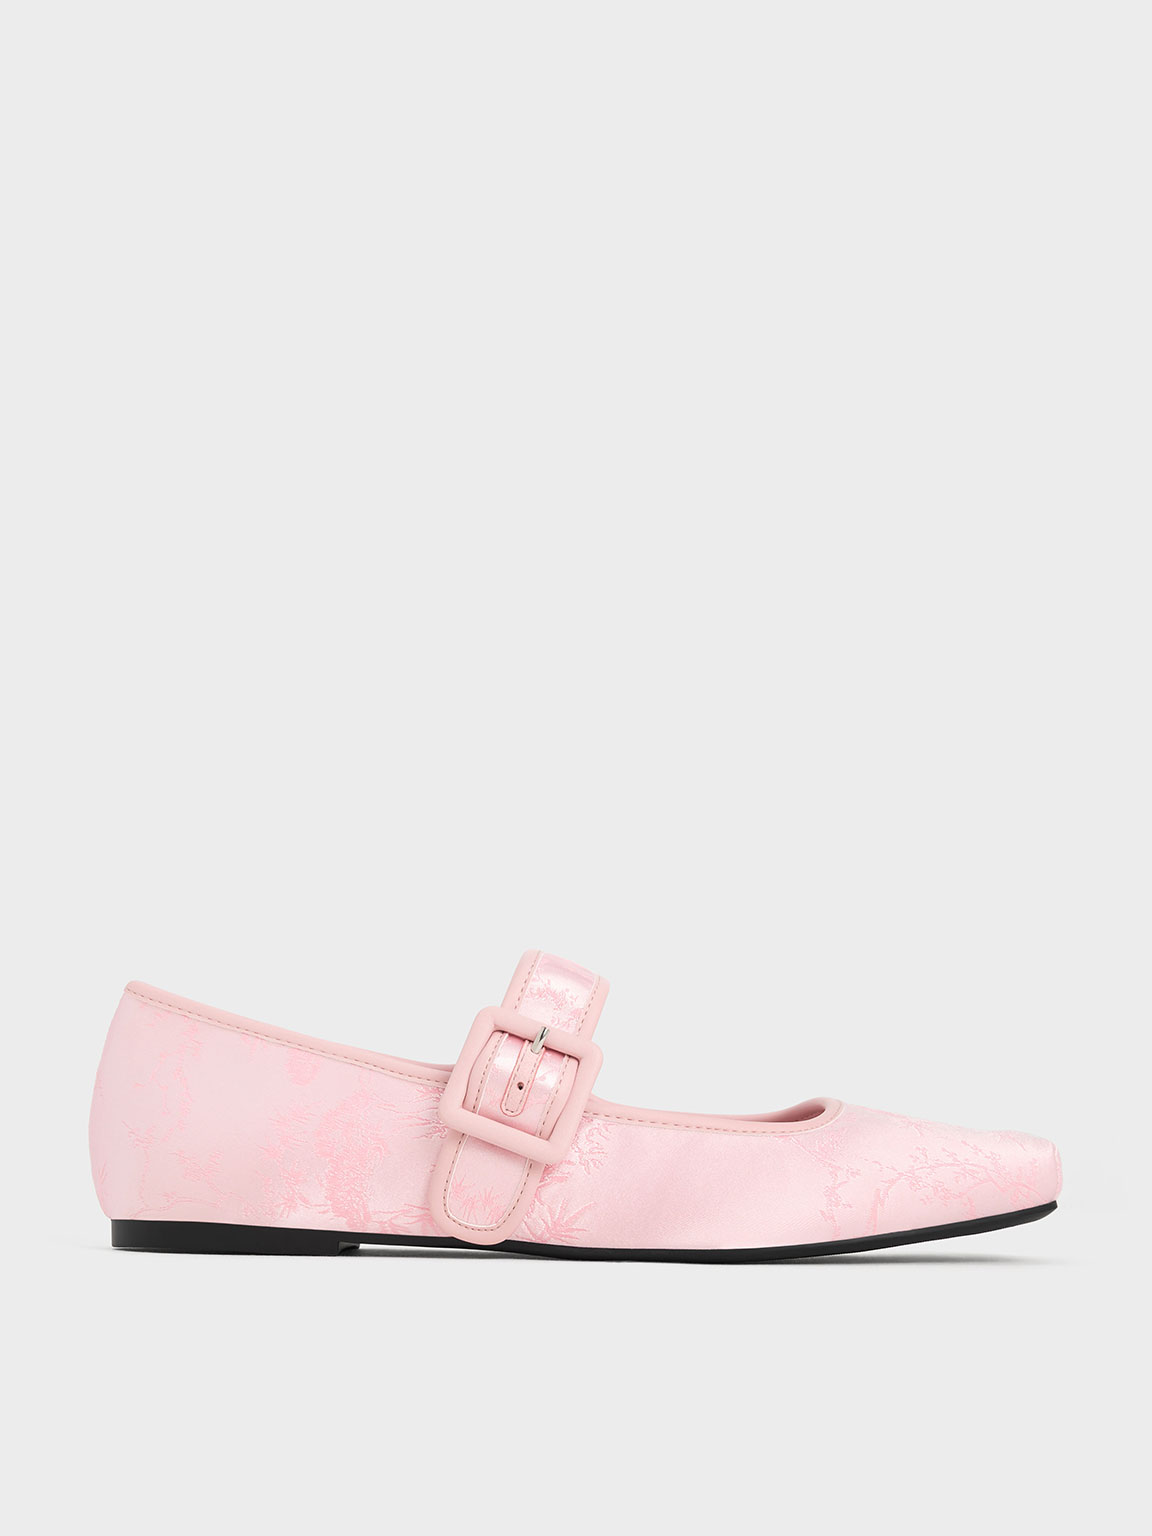 Light Pink Clementine Recycled Polyester Mary Jane Flats - CHARLES ...